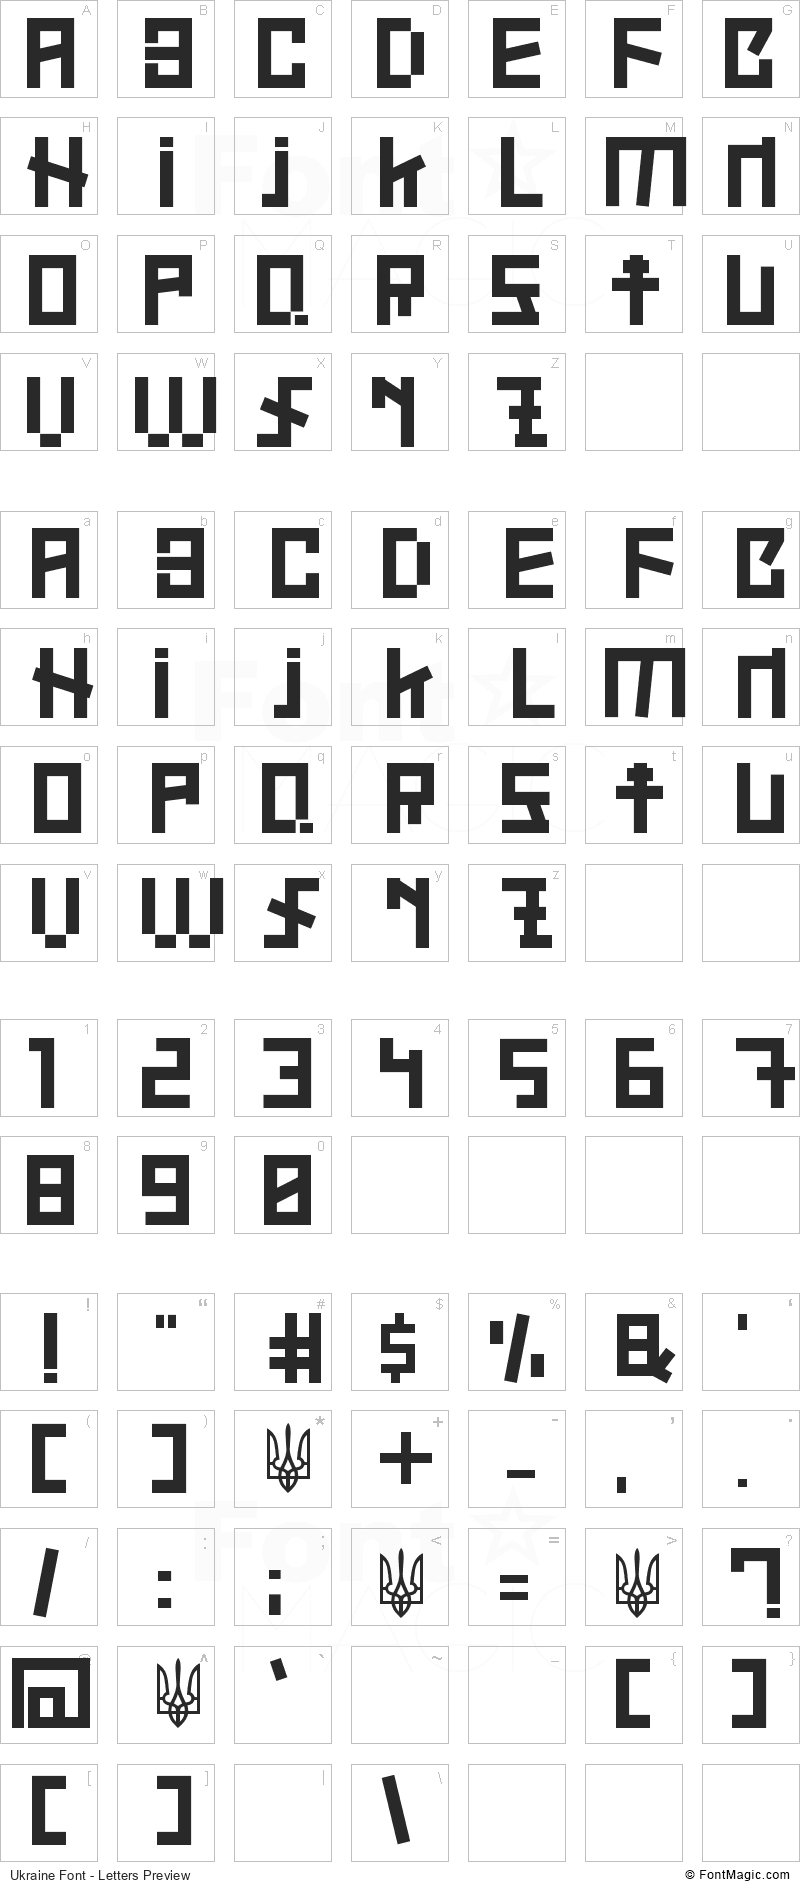 Ukraine Font - All Latters Preview Chart